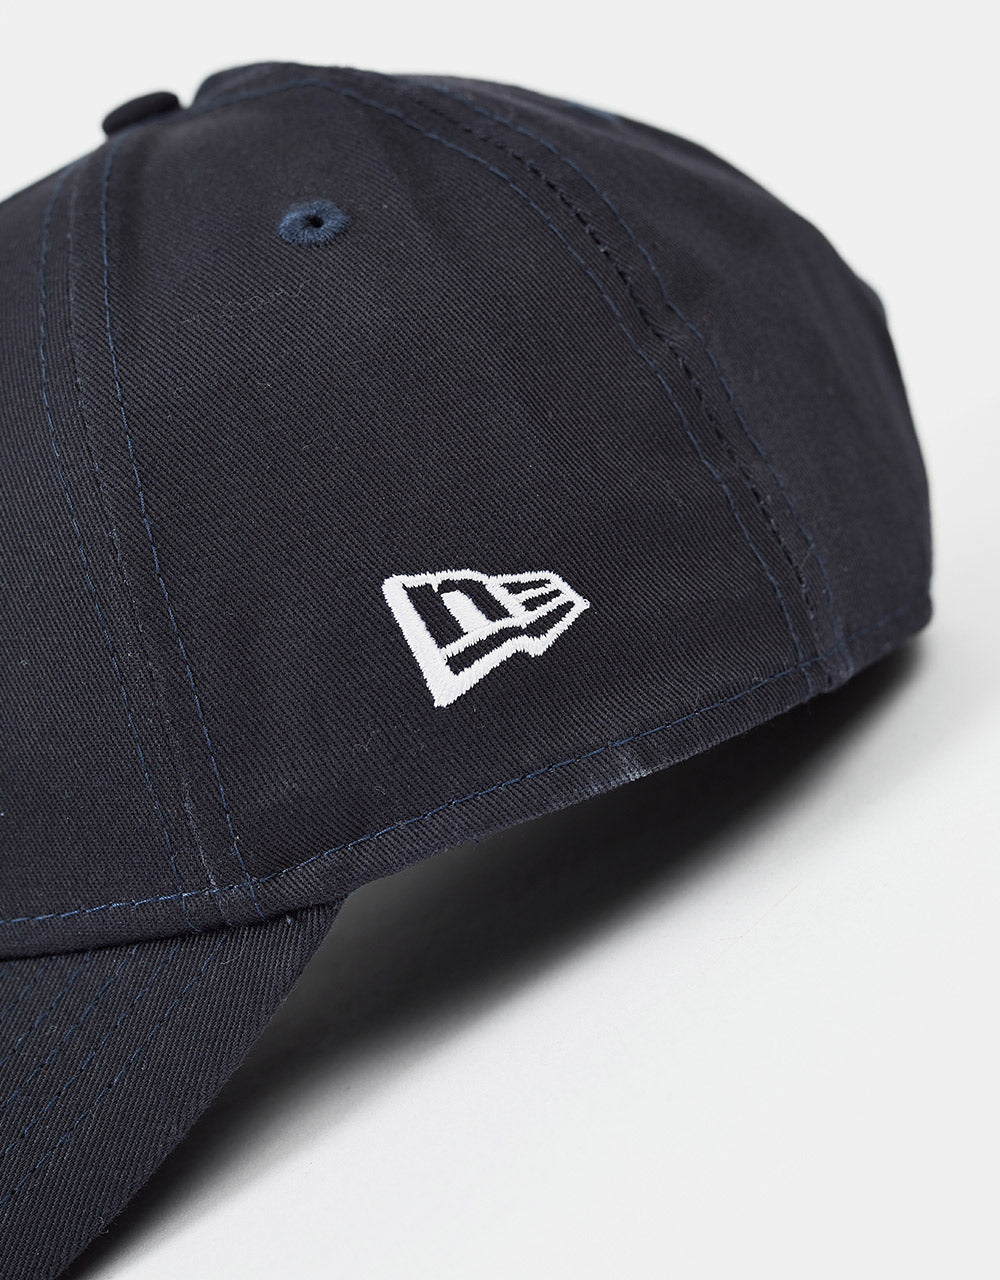 New Era 9Forty Flag Collection Cap - Navy/White